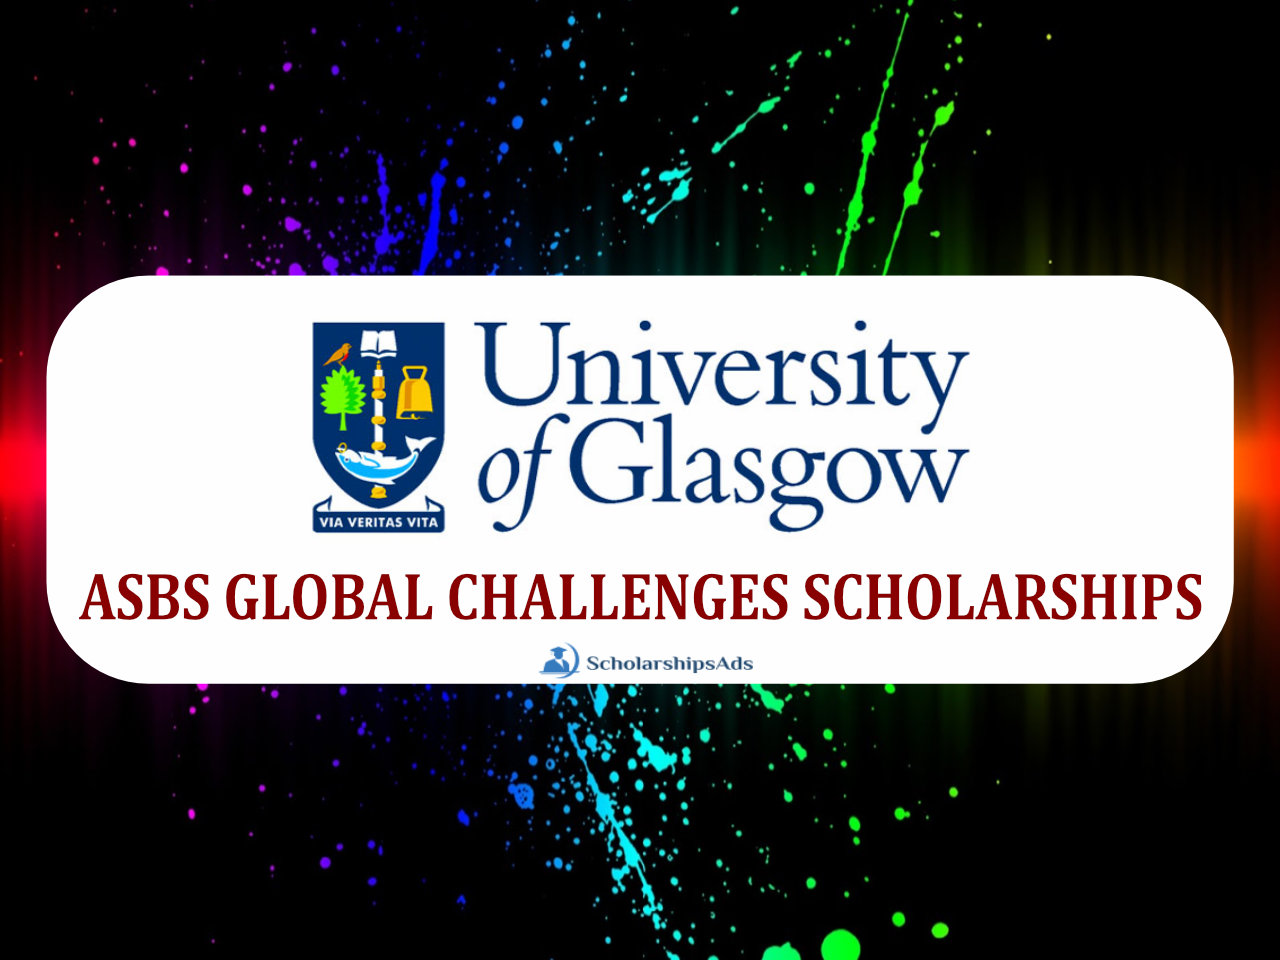 ASBS GLOBAL CHALLENGES Scholarships.